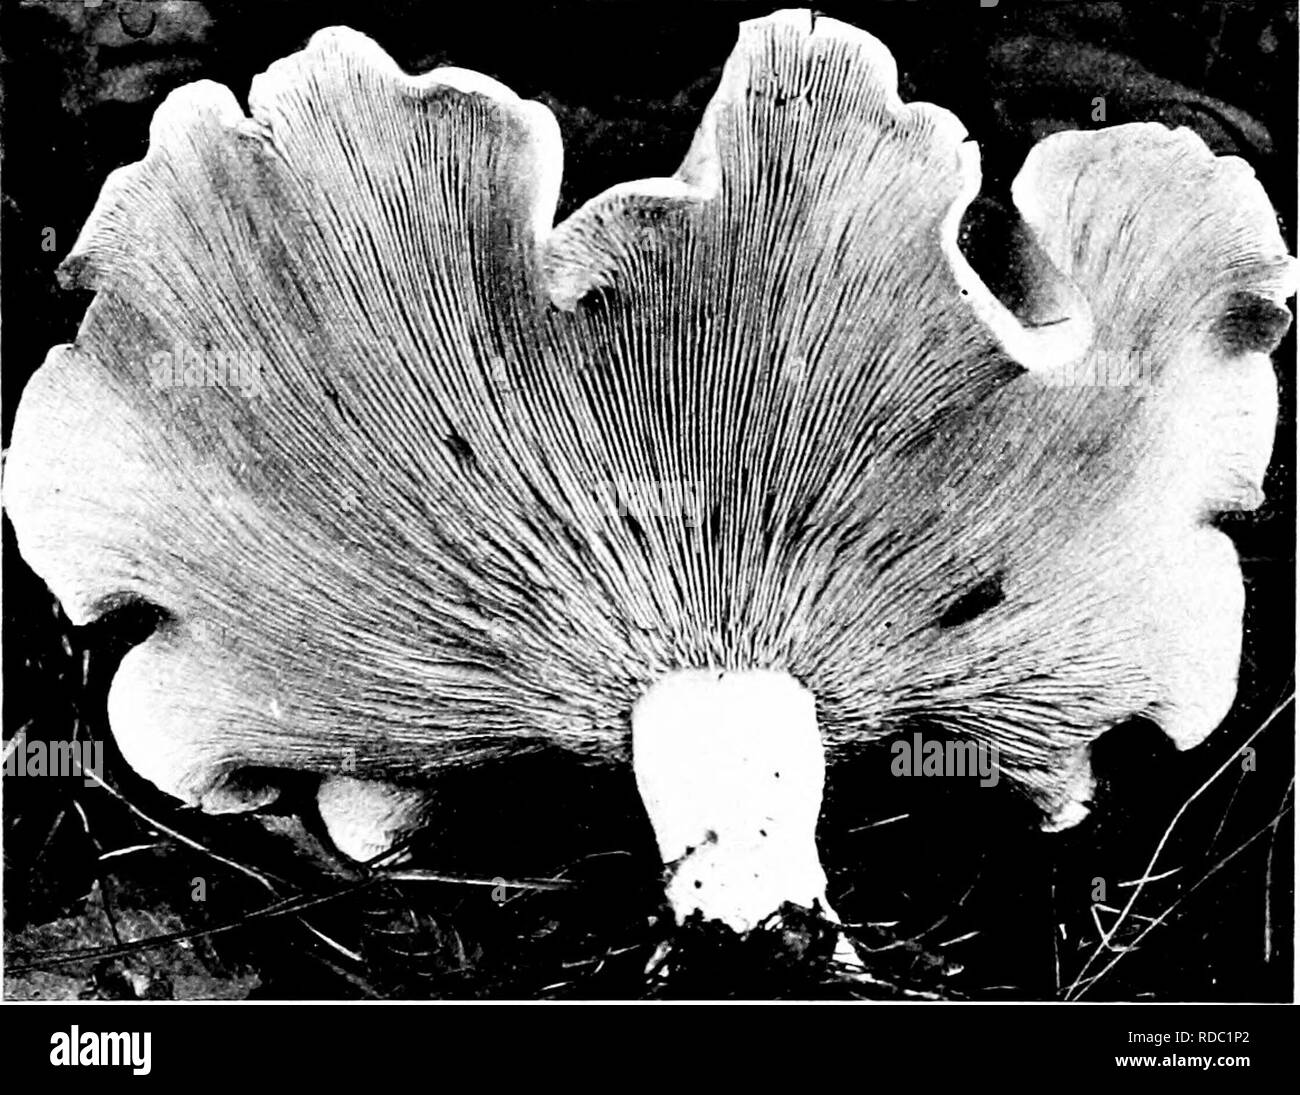 . Minnesota mushrooms ... Botany; Mushrooms. 20 MINNESOTA MUSHROOMS Tricholoma melaleucum Dark Tricholoma C a p rather small. 2-7 cm., dark gray or smoke-colored, smooth, umbonate. bell- shaped to Ciiiivex; stem rather slender, 5-12 cm. by 1 cm., whitish, with a few threads, stuttetl or hollow, elastic ; gills sinuate, white, broad, crowded ; s p ores ellijisoid, 9-111 &quot;• 5-6/i. The name refers to the contrast between the dark cap and white gills. ( )n the ground in woods, in autumn: probably edible, though not tested by the writer. Tricholoma patiilum Scallop Top C i ]j medium to large. Stock Photo